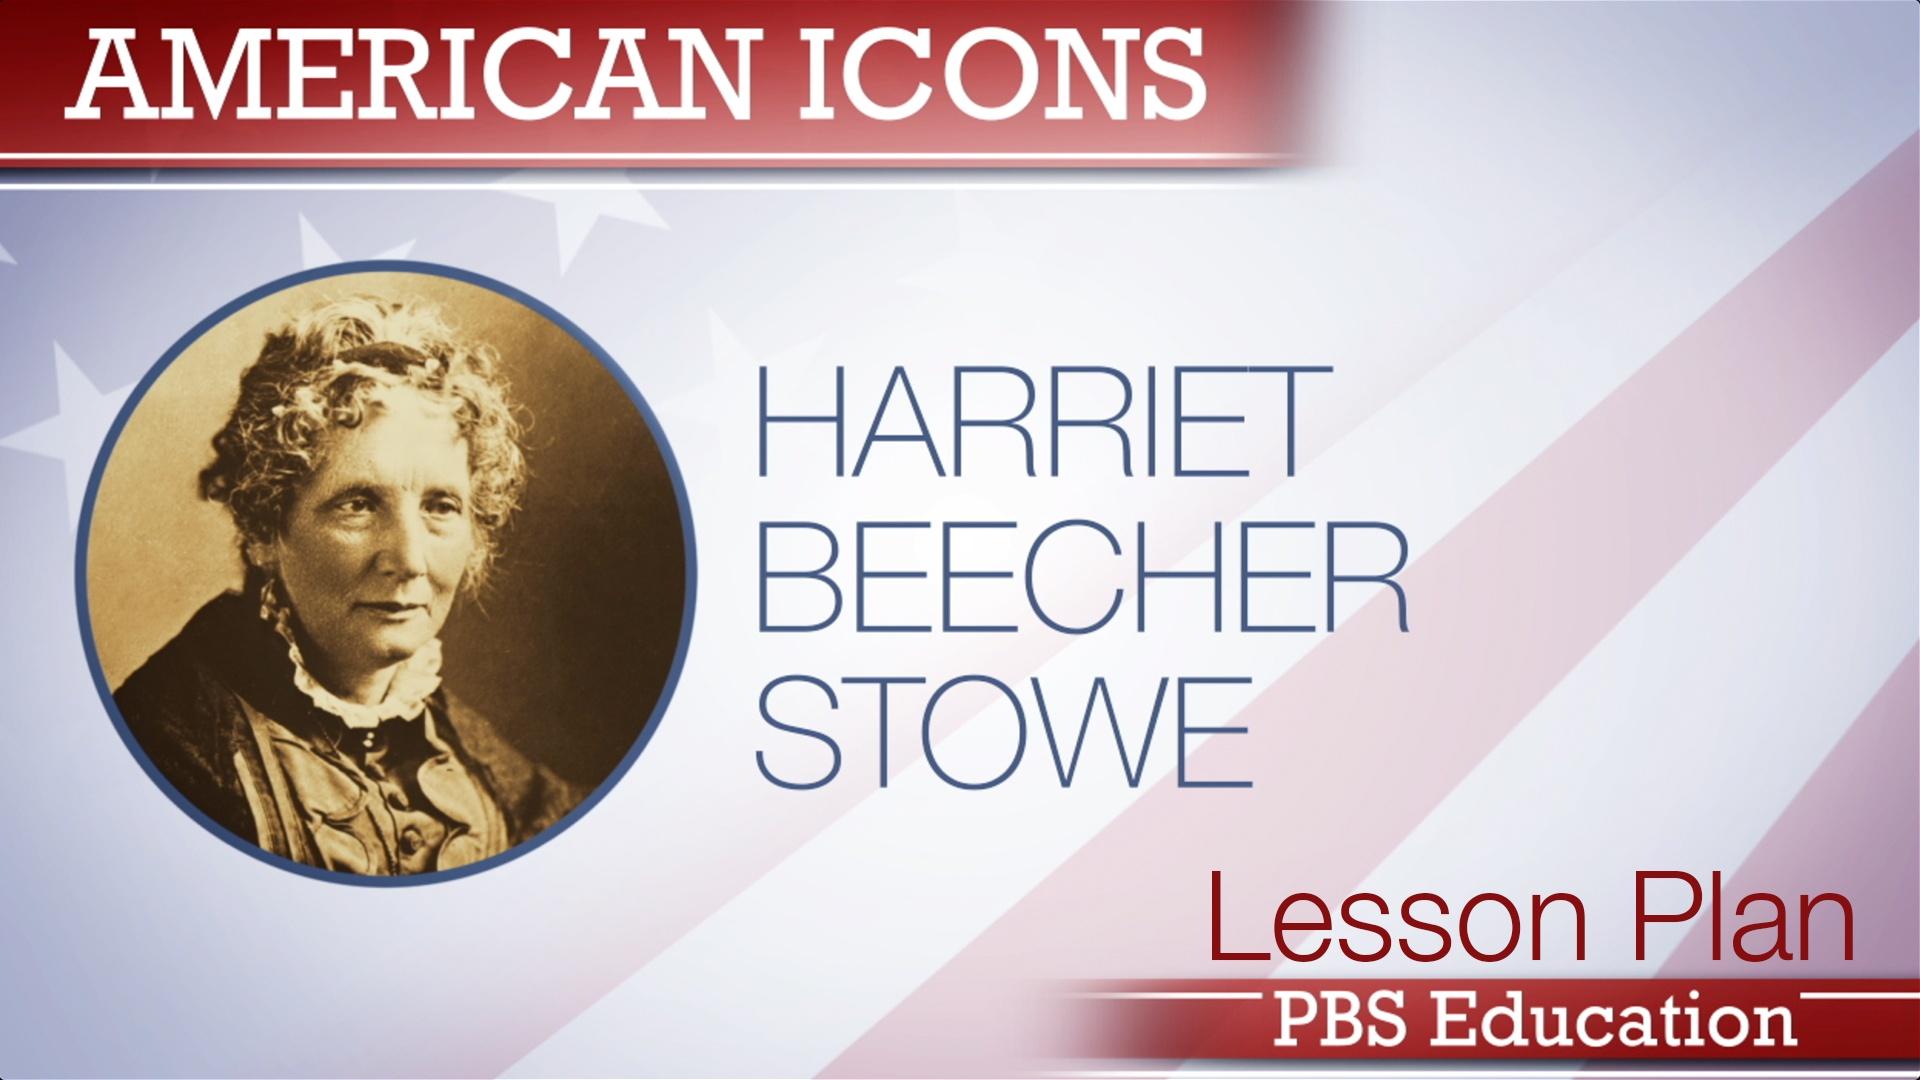 Harriet Beecher Stowe | Author and Abolitionist | PBS LearningMedia